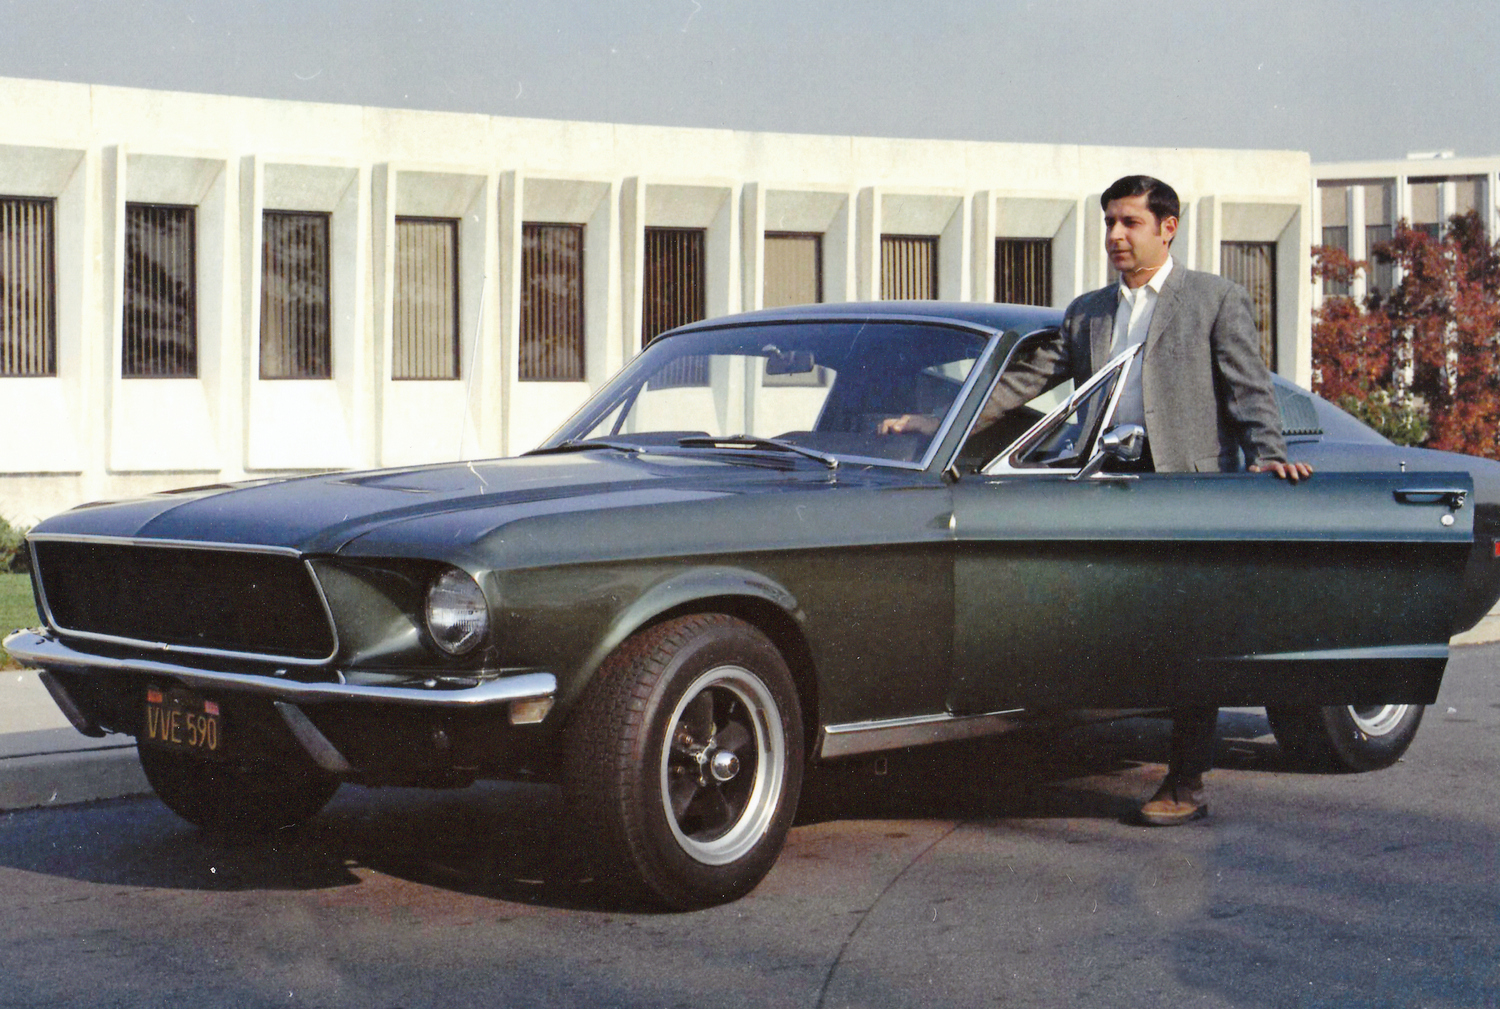   These images of surviving Bullitt no. 559 (circa 1973) are from the only known photo session of the car after it left the movie studio.&nbsp; Property Frank Marranca   